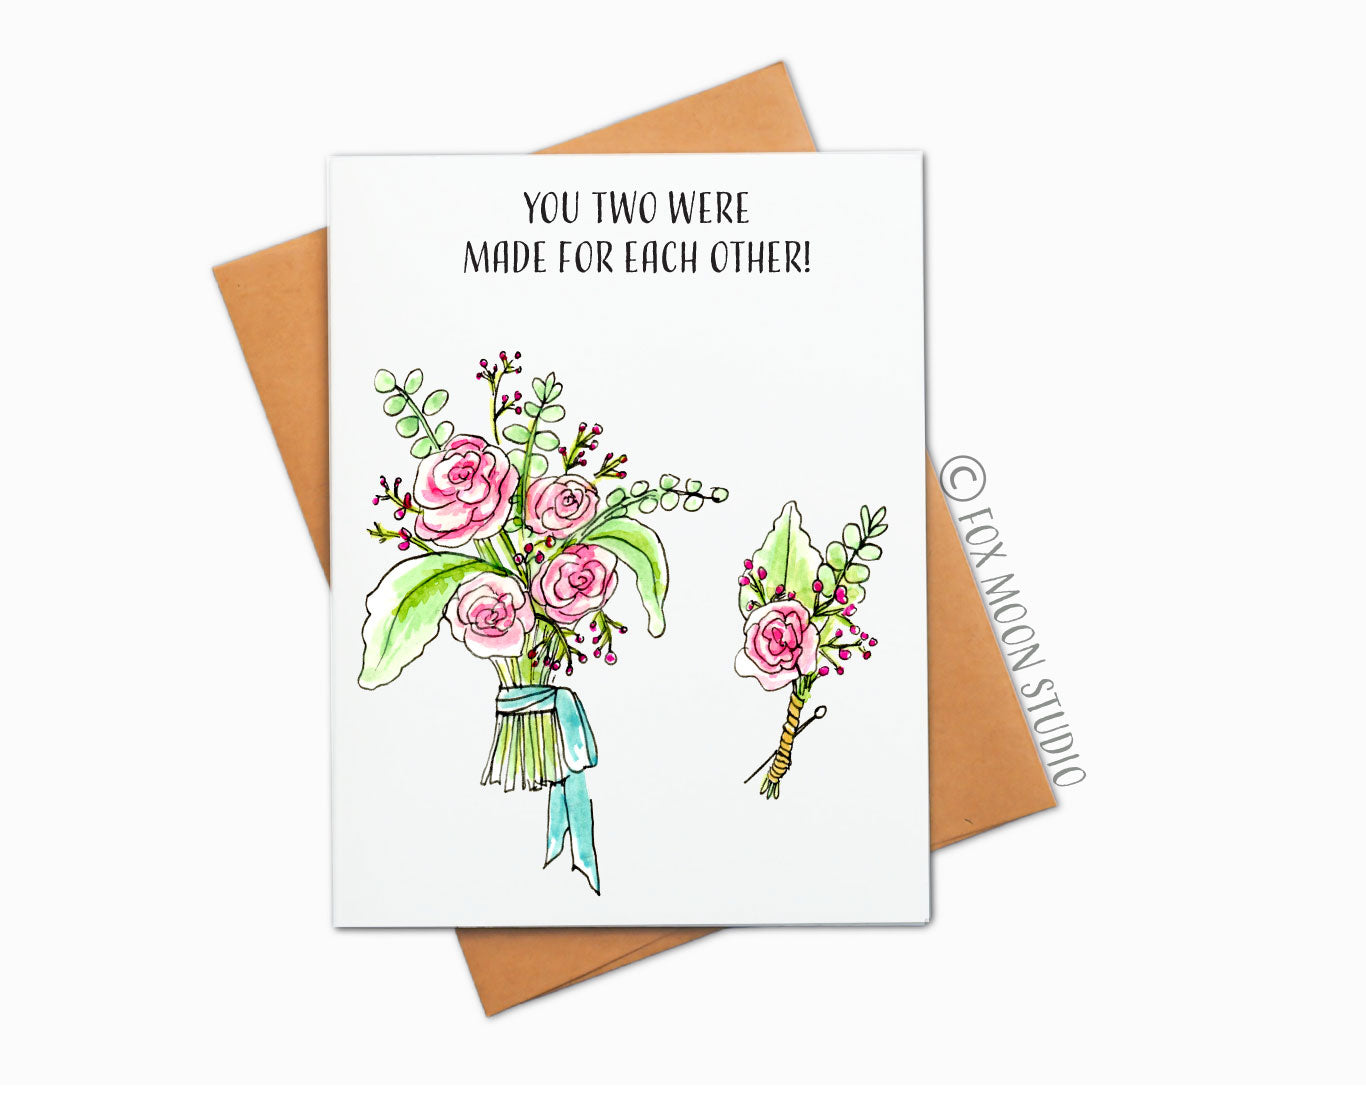 You two were made for each other! - Wedding Greeting Card